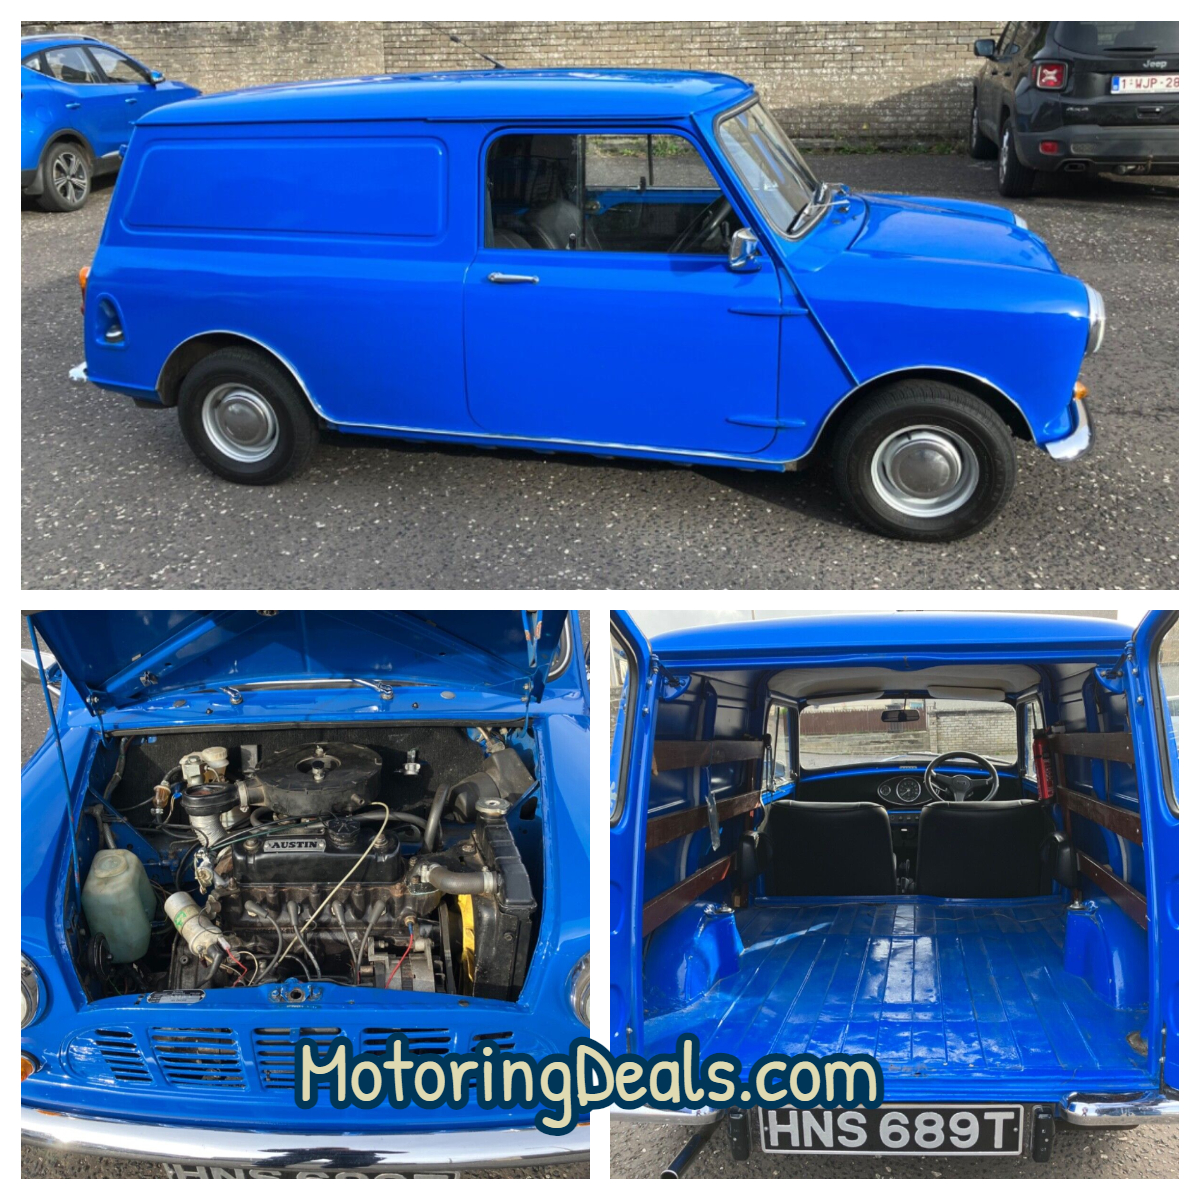 1979 Austin Mini Van - owned by seller for 21 years
More info --> ow.ly/sF5G50PWQ9Q

 #ClassicCars #MiniVan #AustinMini #CarCollectors #CarForSale #CarHistory #CarOwnership